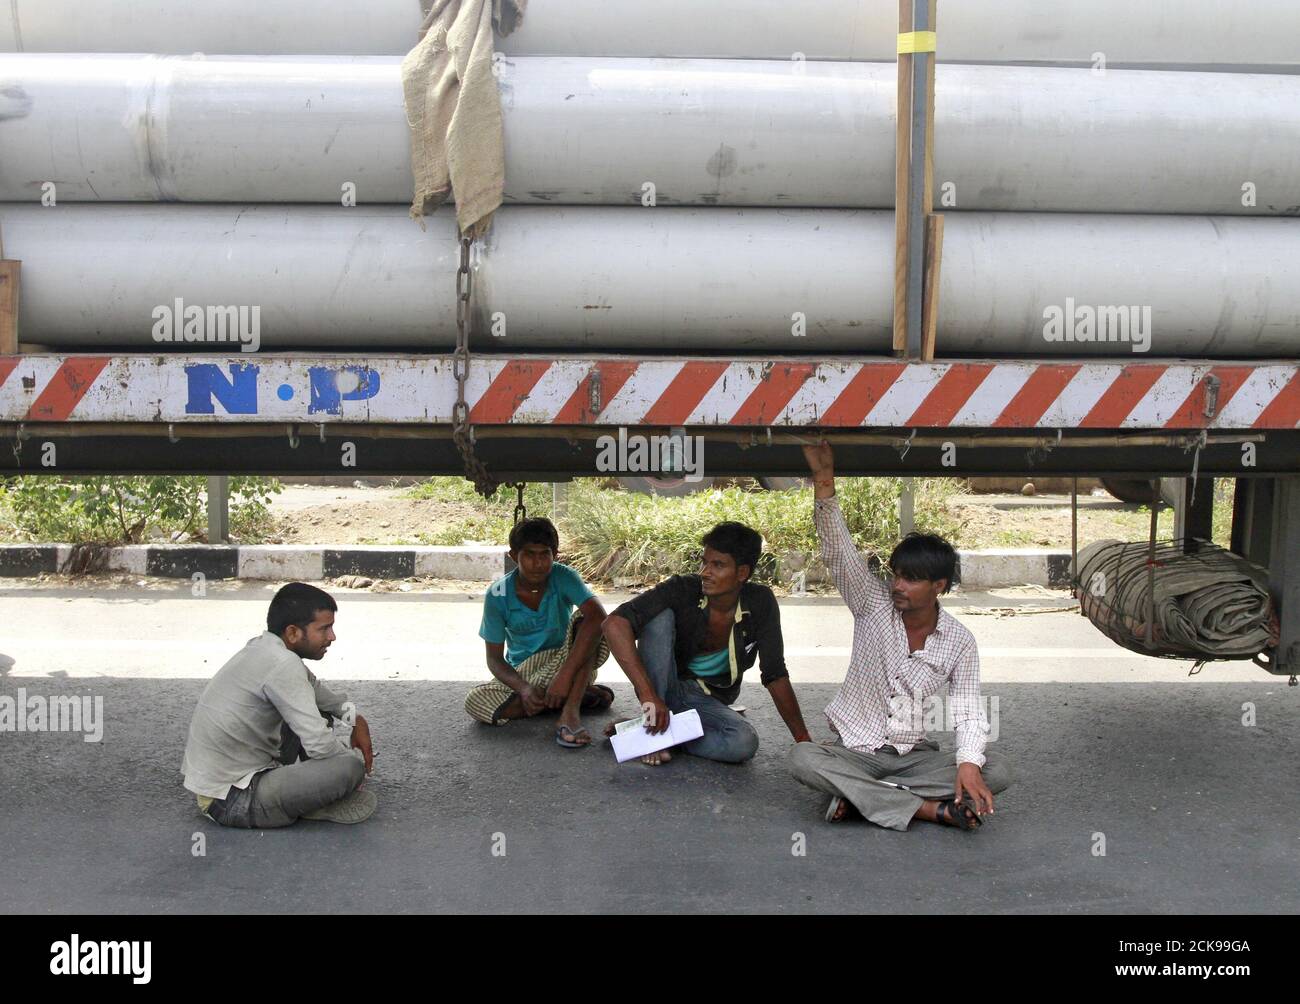 Truck drivers and helpers sit under a parked truck while waiting to get their loads cleared to cross a checkpoint at the Commercial Taxes Department check post at Walayar in Palakkad district in southern Indian state of Kerala, India, September 5, 2015. At the Walayar checkpoint in southern India, lines of idle trucks stretch as far as the eye can see in both directions along the tree-lined interstate highway, waiting for clearance from tax inspectors that can take days to complete. The rollout of a nationwide goods and services tax (GST) from April was supposed to sweep away hundreds of check Stock Photo